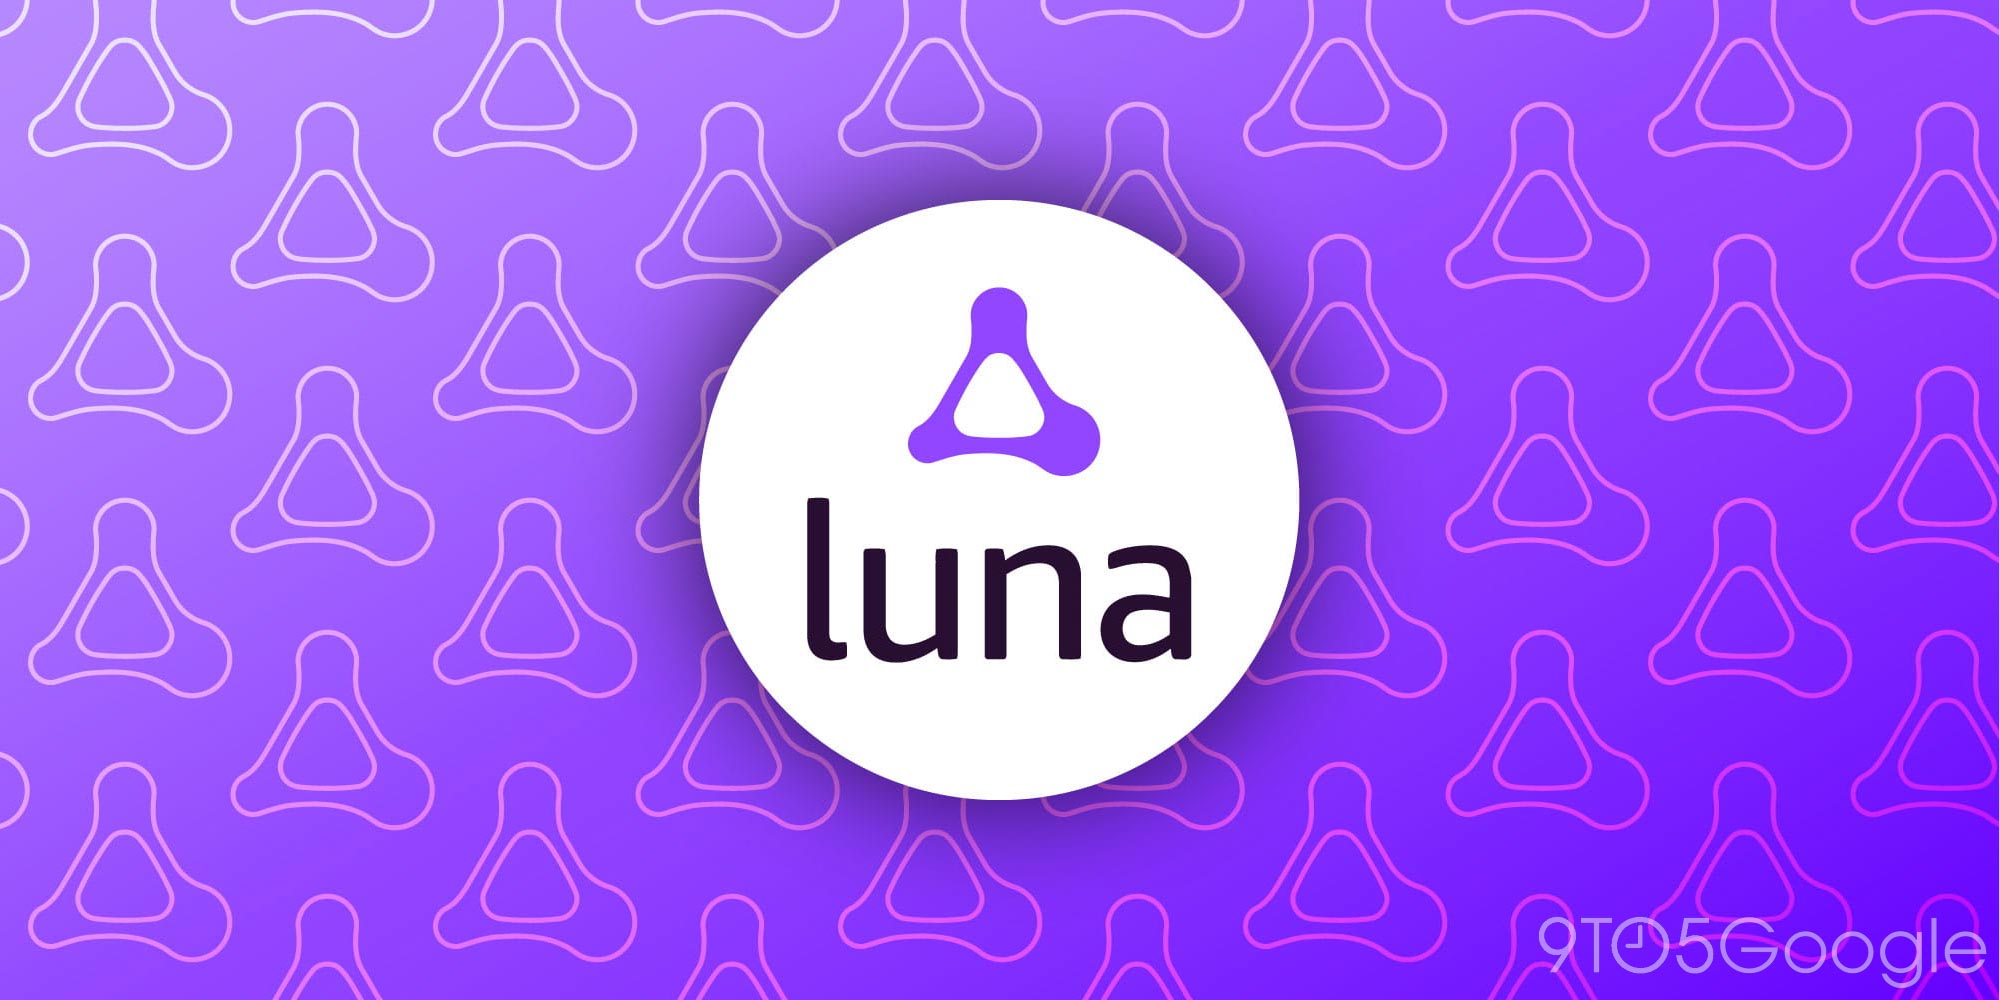 Luna expands to three more countries in Europe